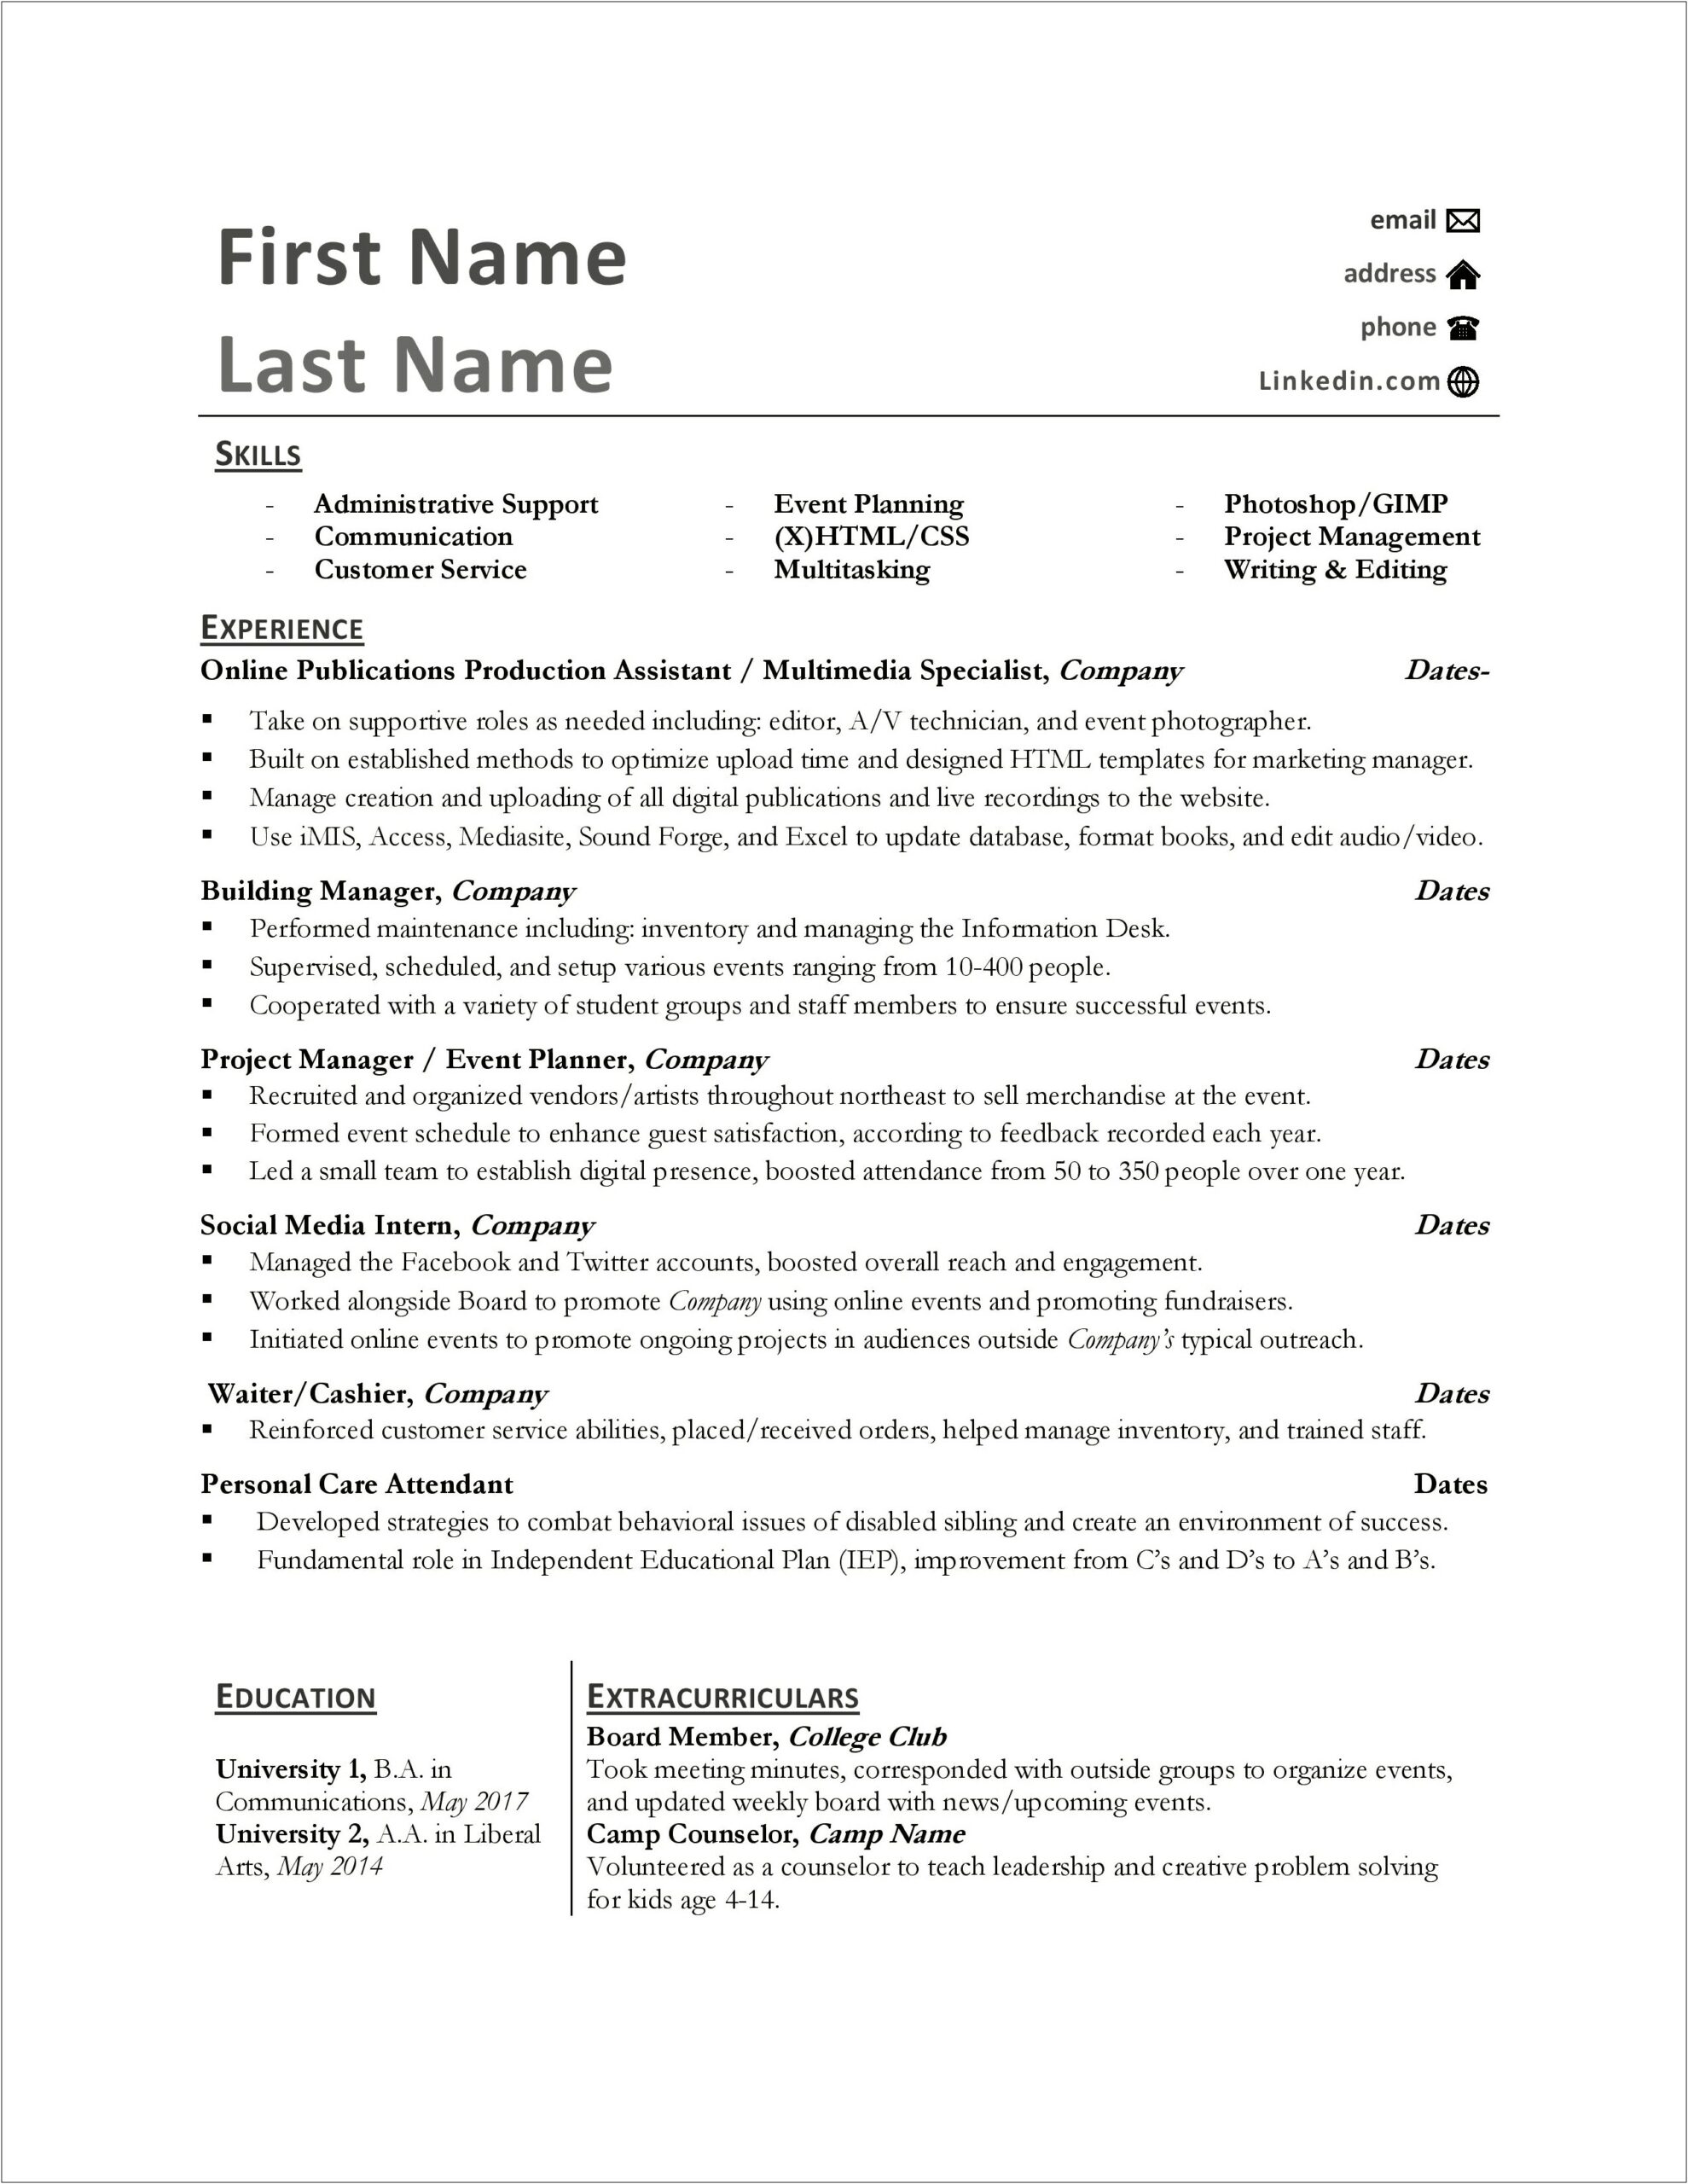 Two Jobs For Same Employer Resume